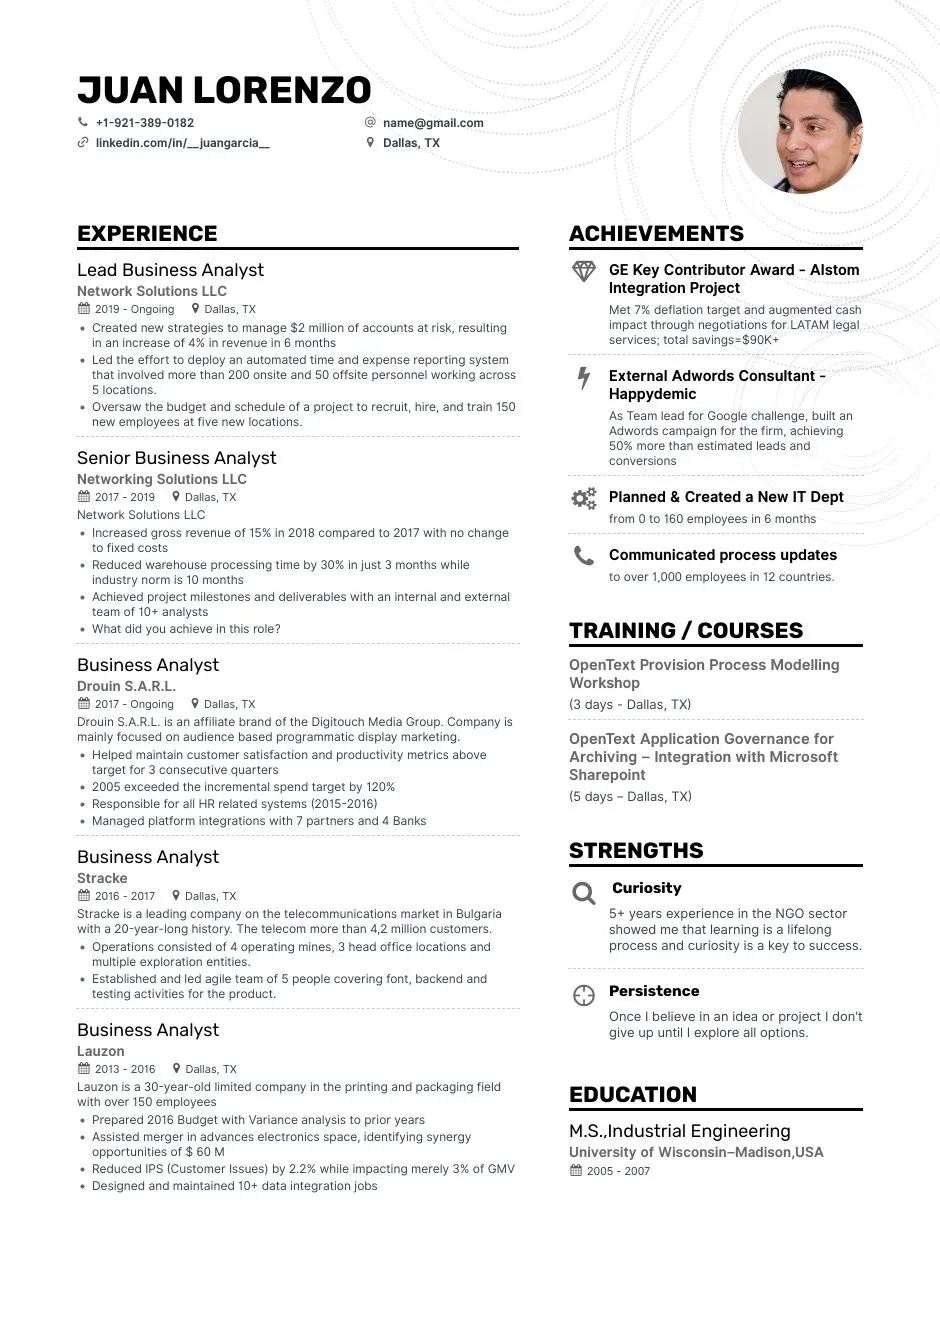 Business Analyst template